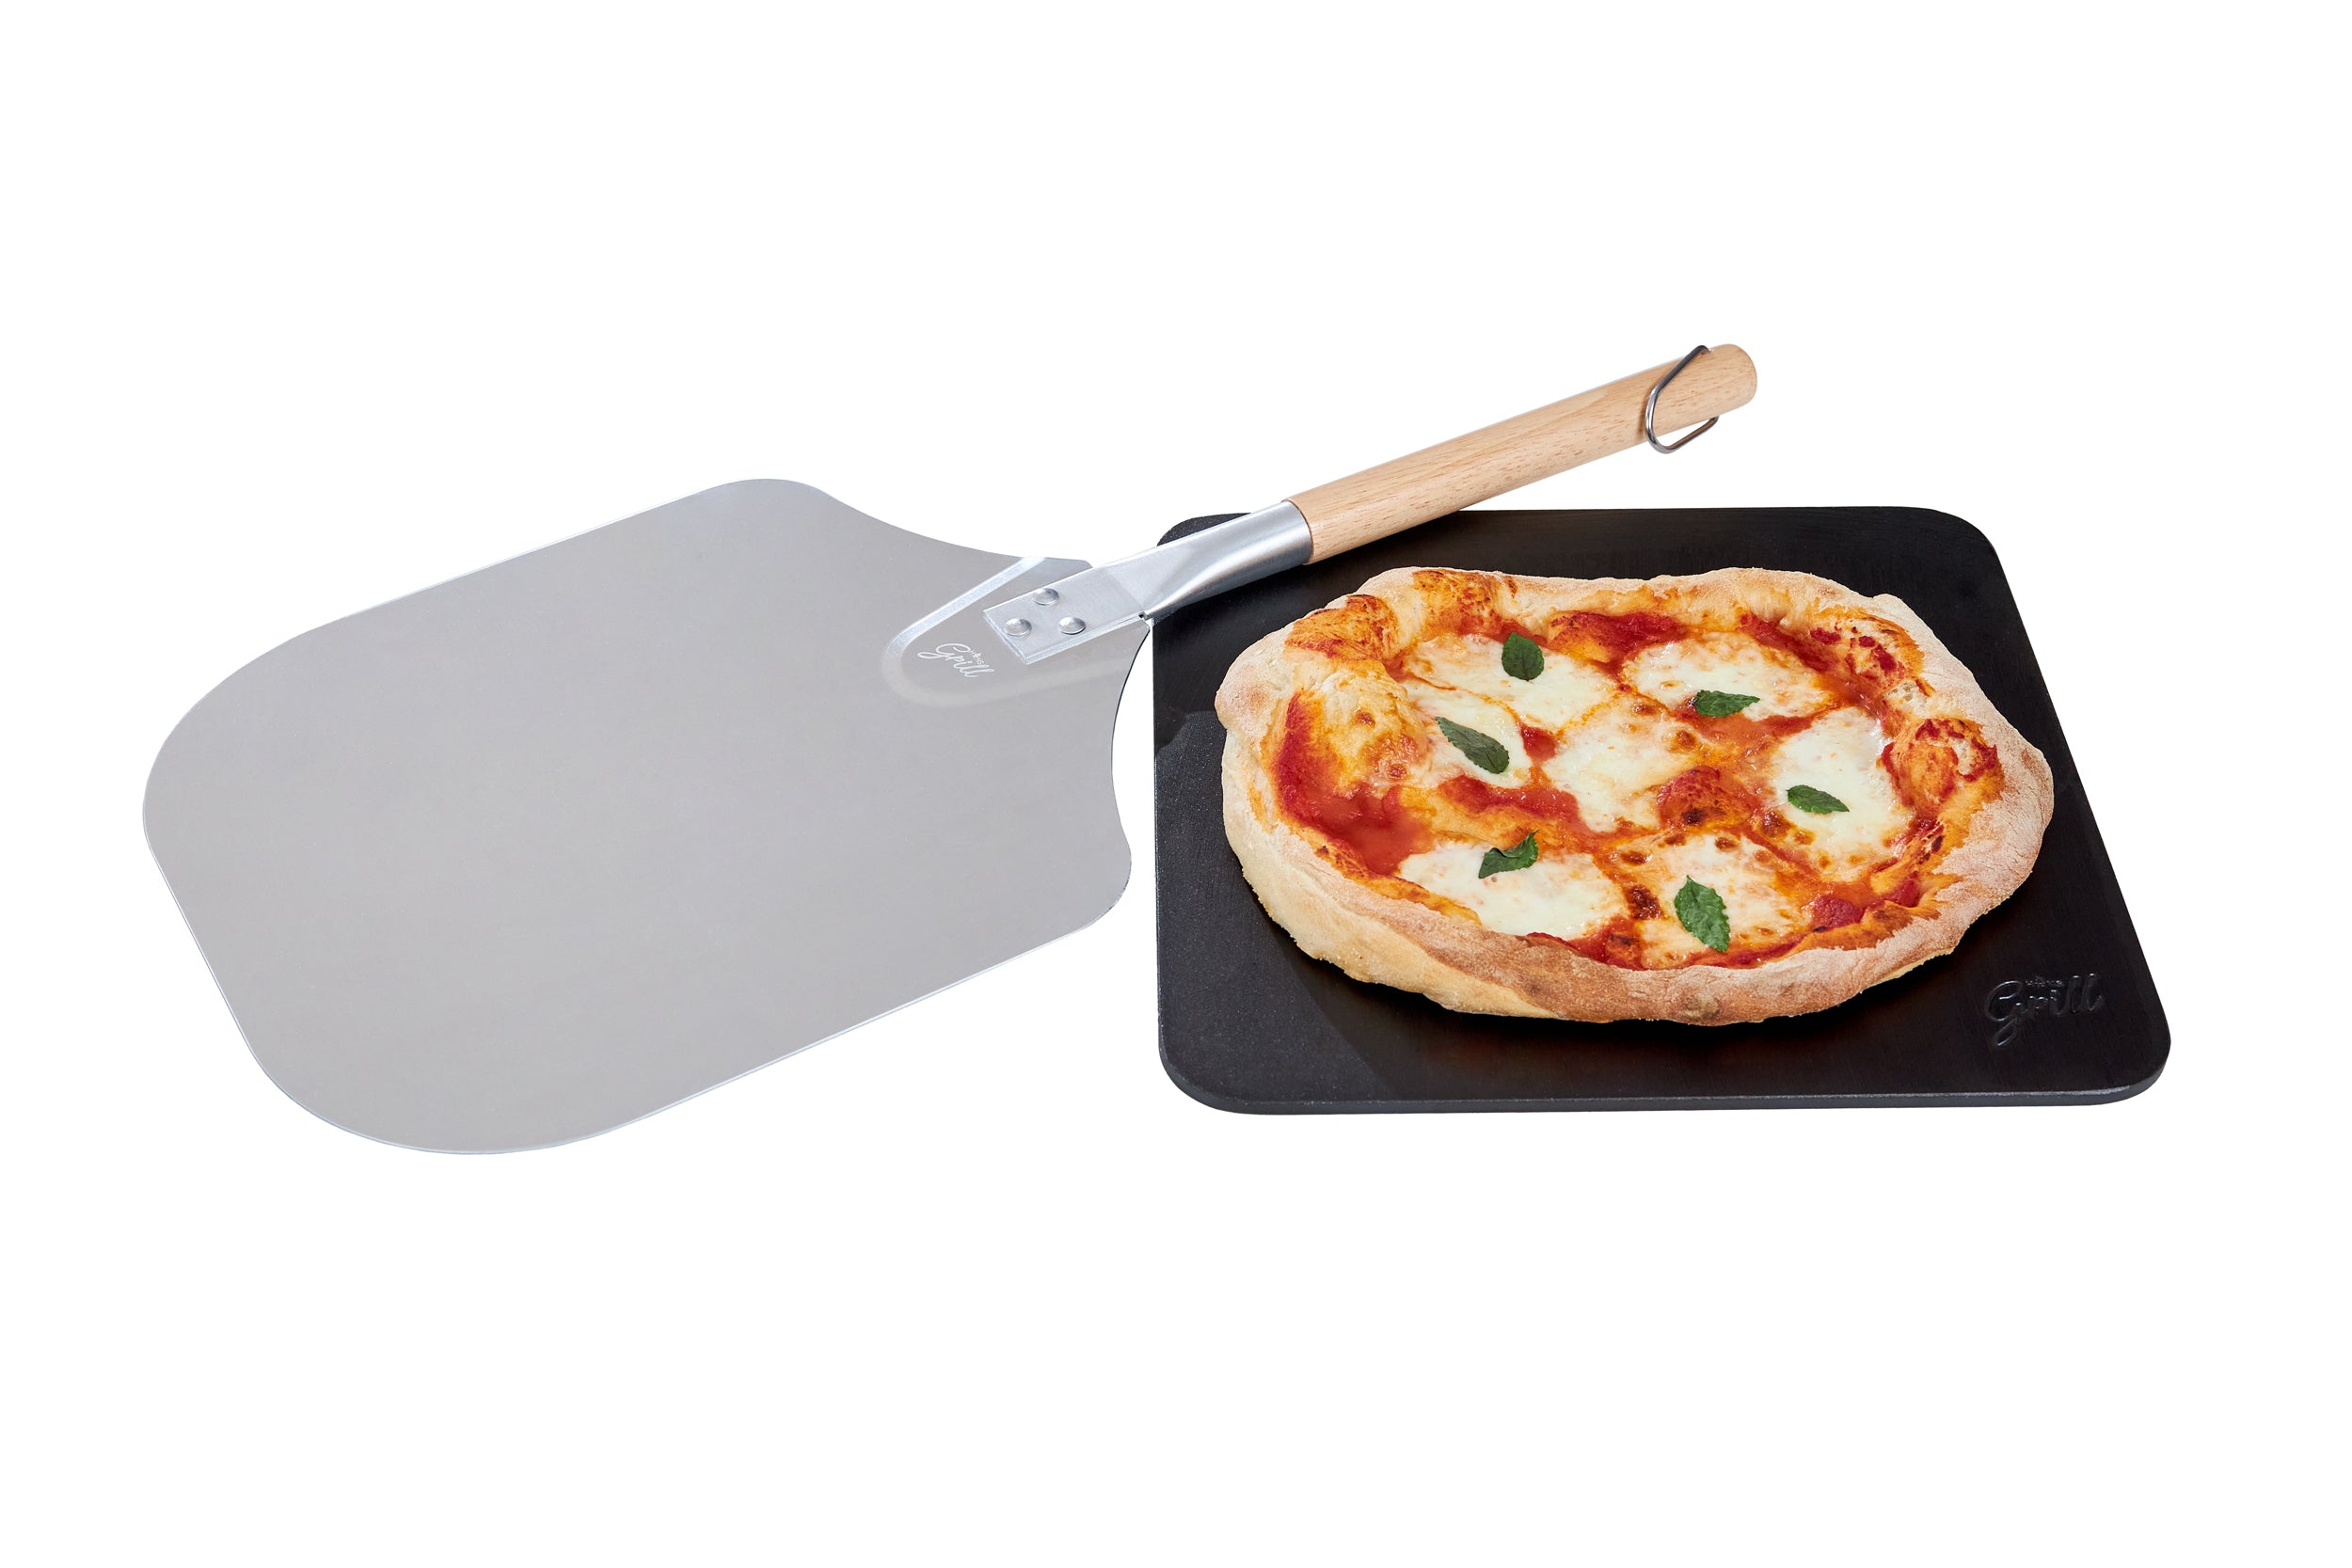 Hans Grill Pizza Stone PRO XL Baking Stone For Pizzas use in Oven, Grill or  BBQ FREE Long Handled Anodised Aluminium Pizza Peel | Rectangular Stone 15